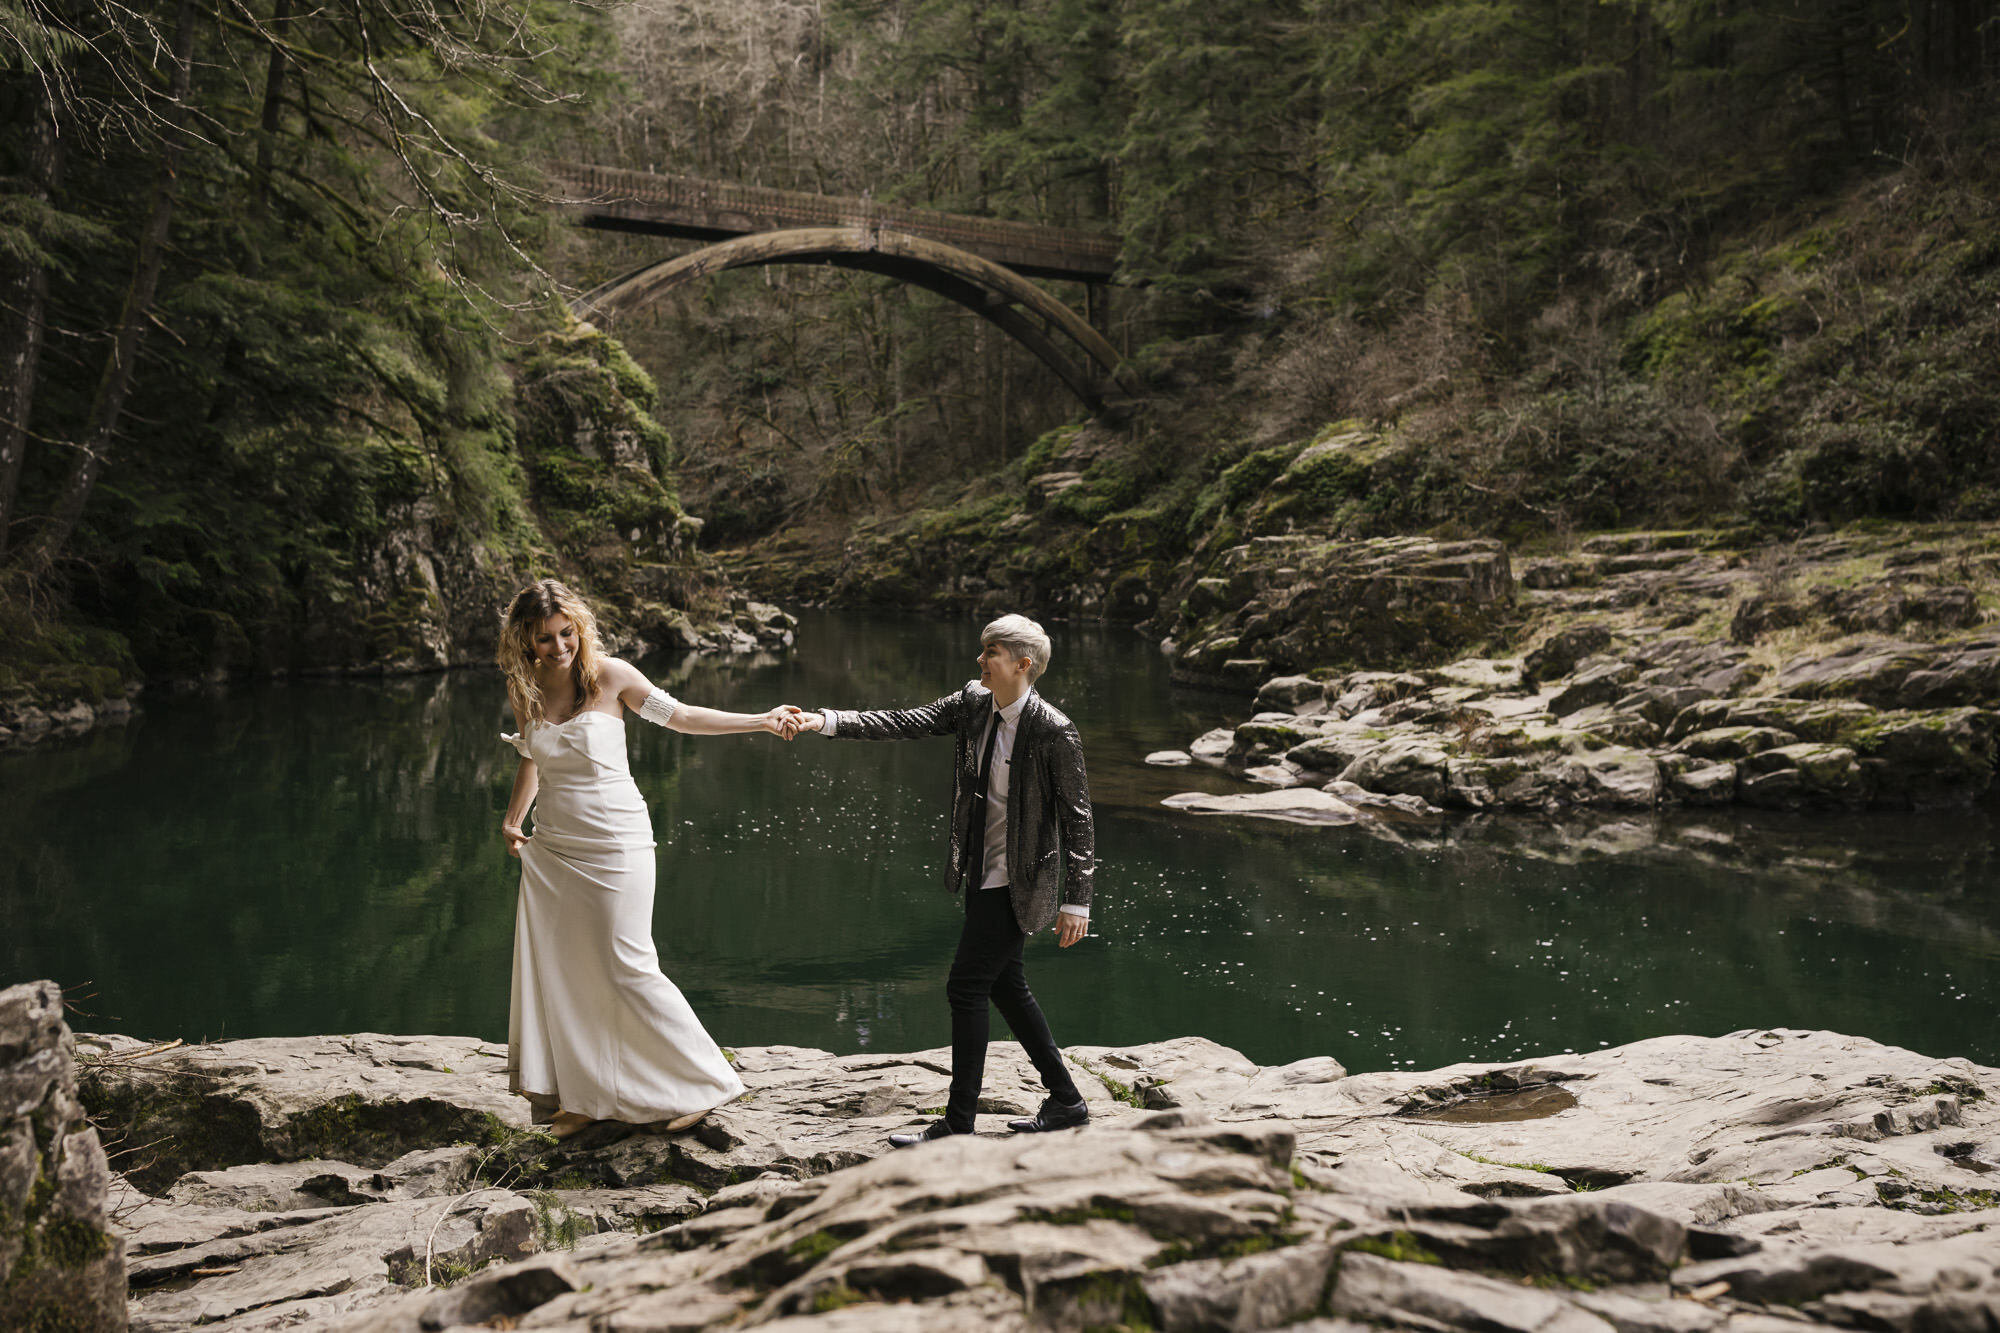 Bride playfully leads her partner walking across the rocks in front of the bridge at Moulton Falls in Washington